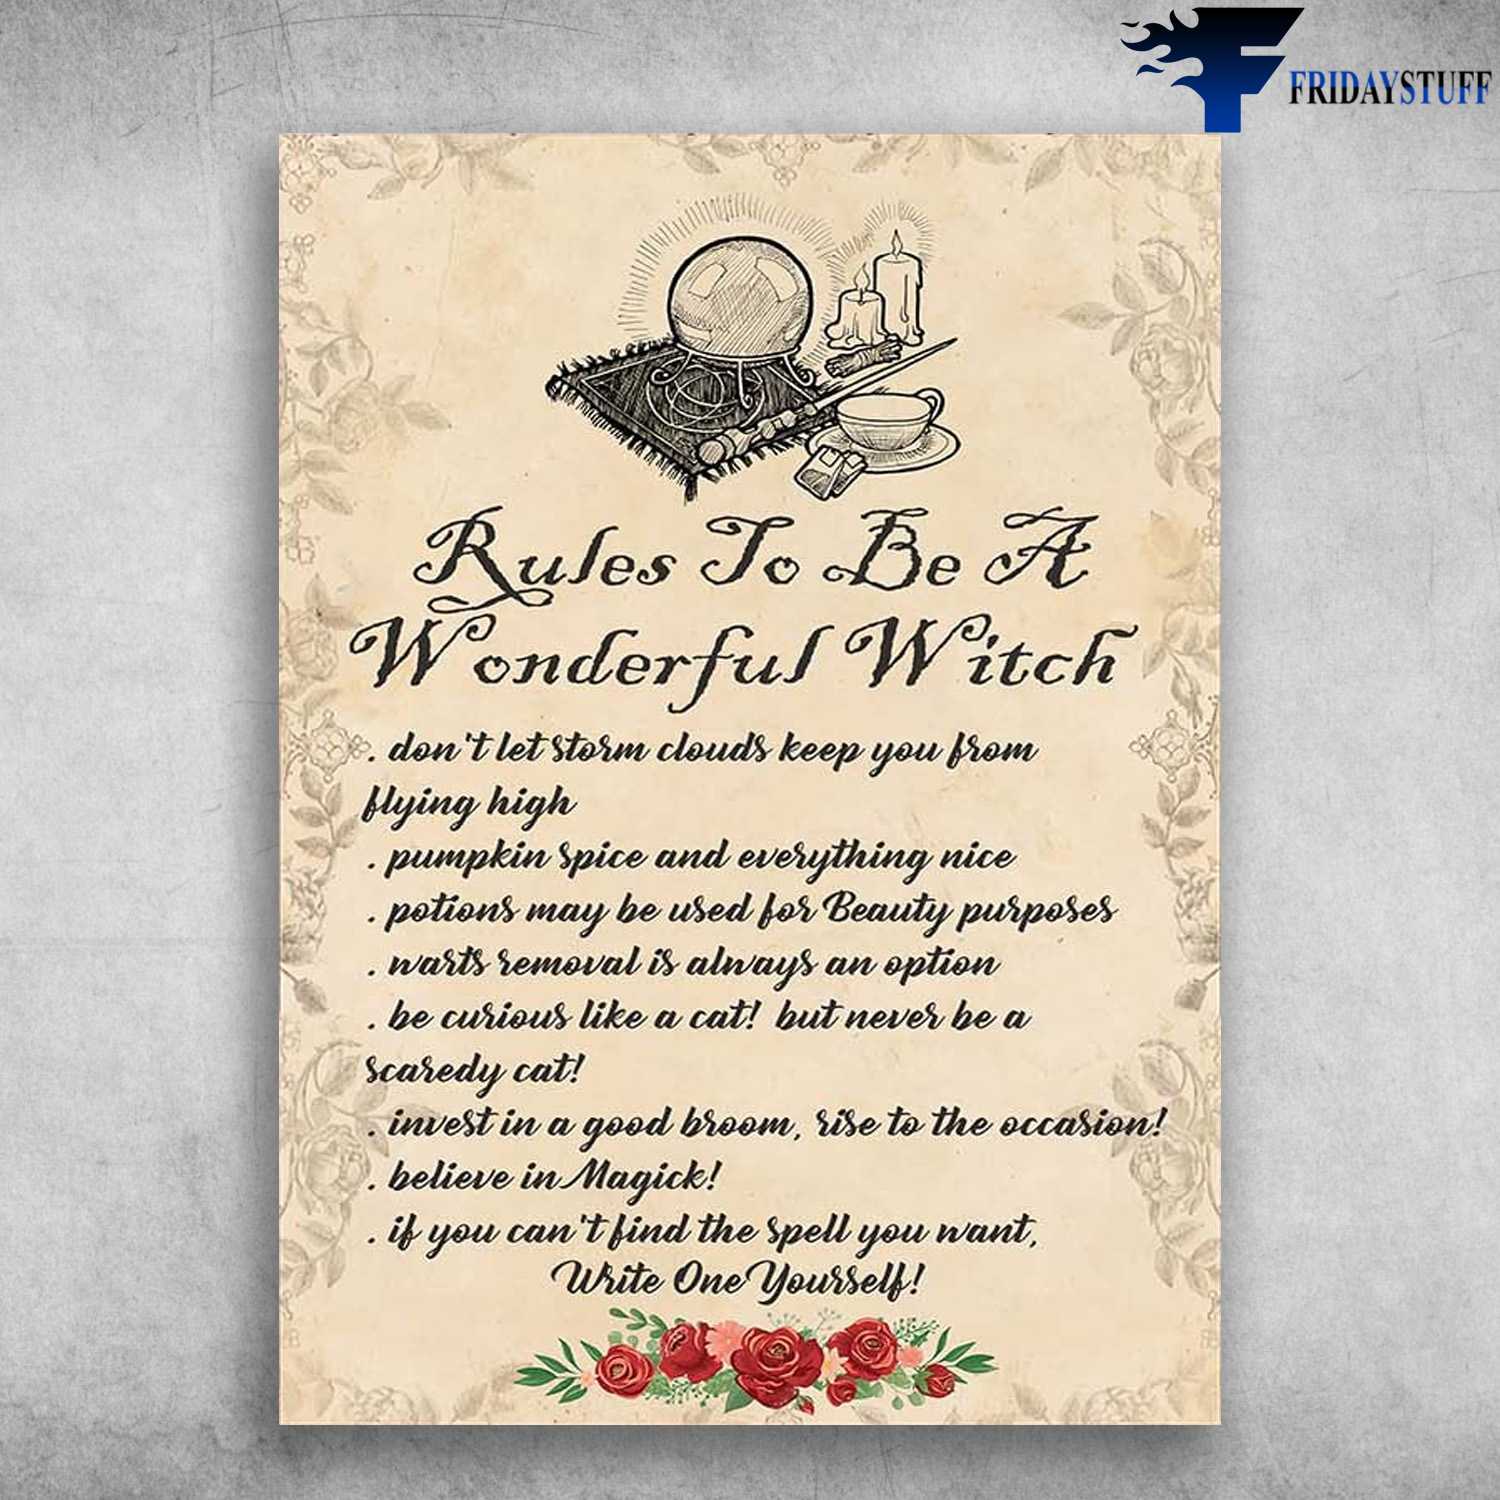 Witch Poster - Rules To Be A Wonderful Witch, Don't Let Storm Clouds Keep You From Flying High, Pumpkin Spice And Everything Nice, Halloween Poster